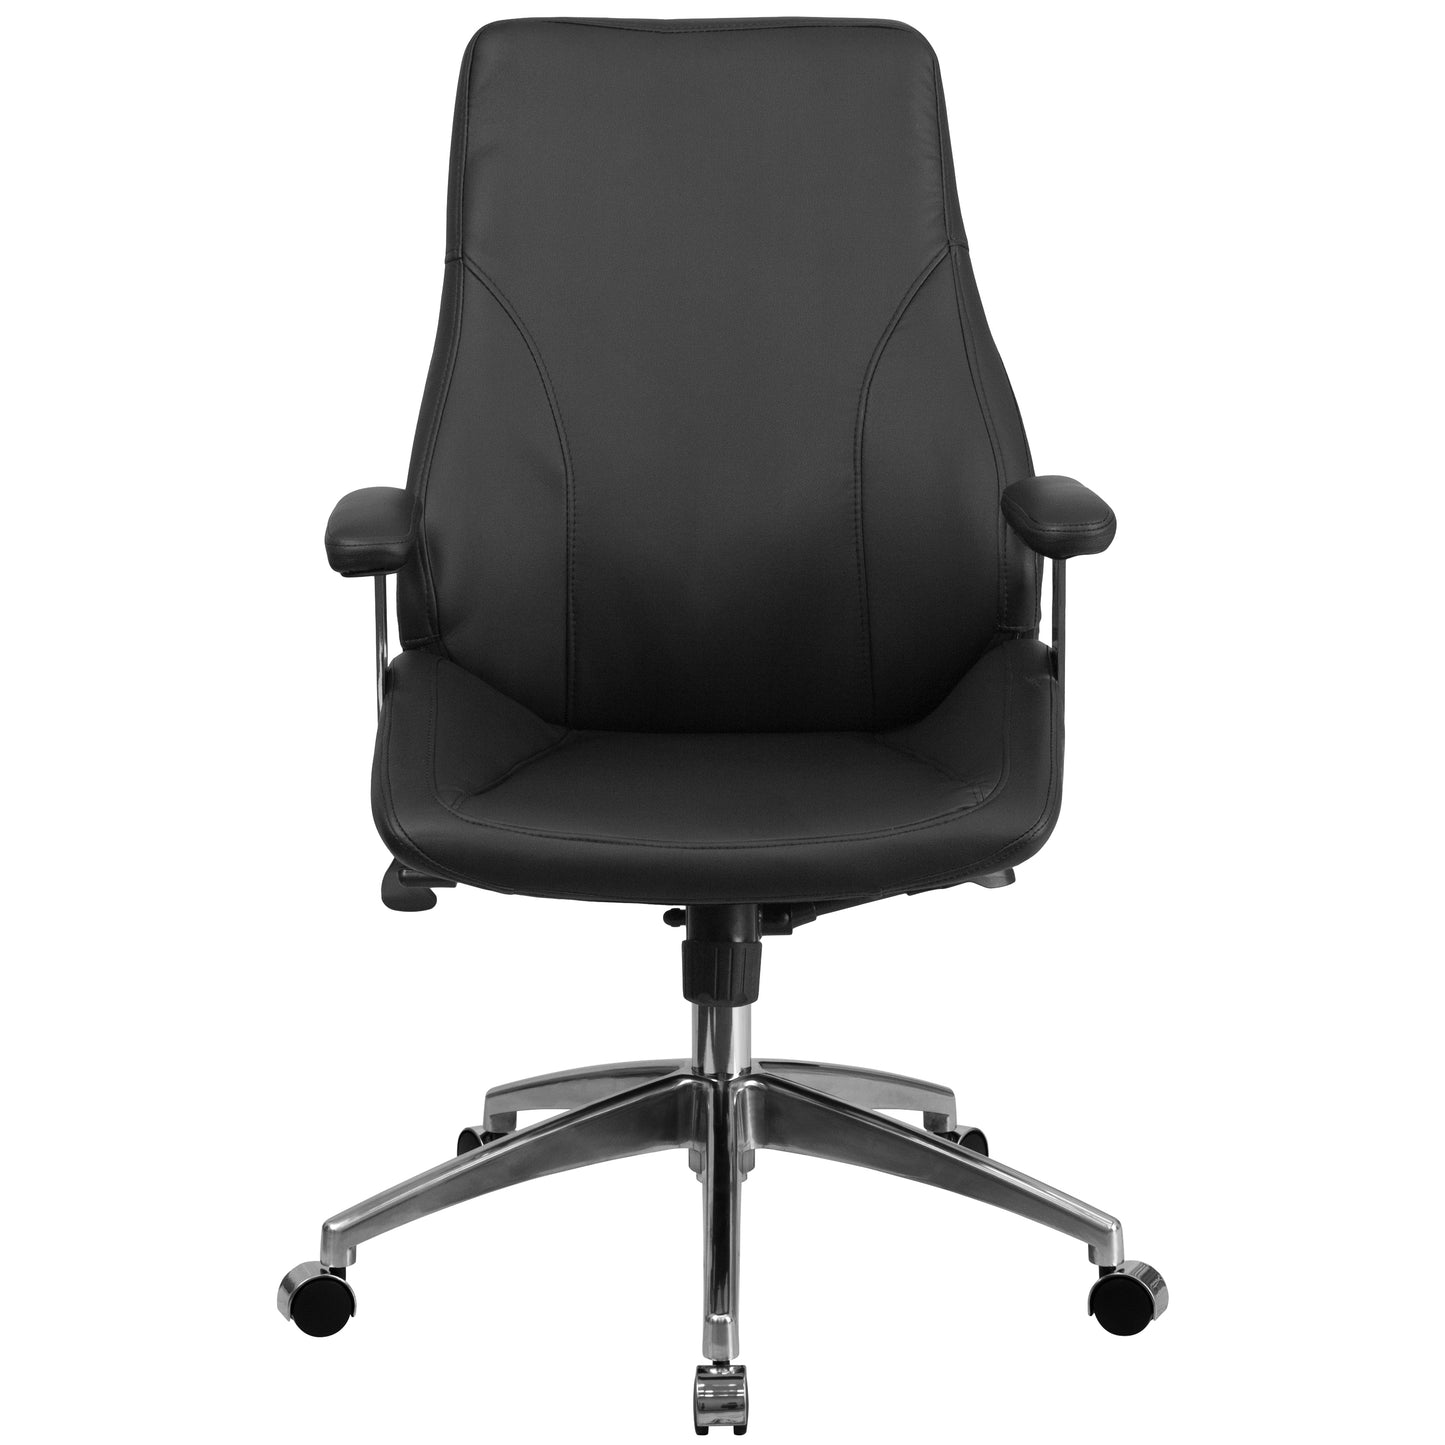 Upholstered Executive Office Chair